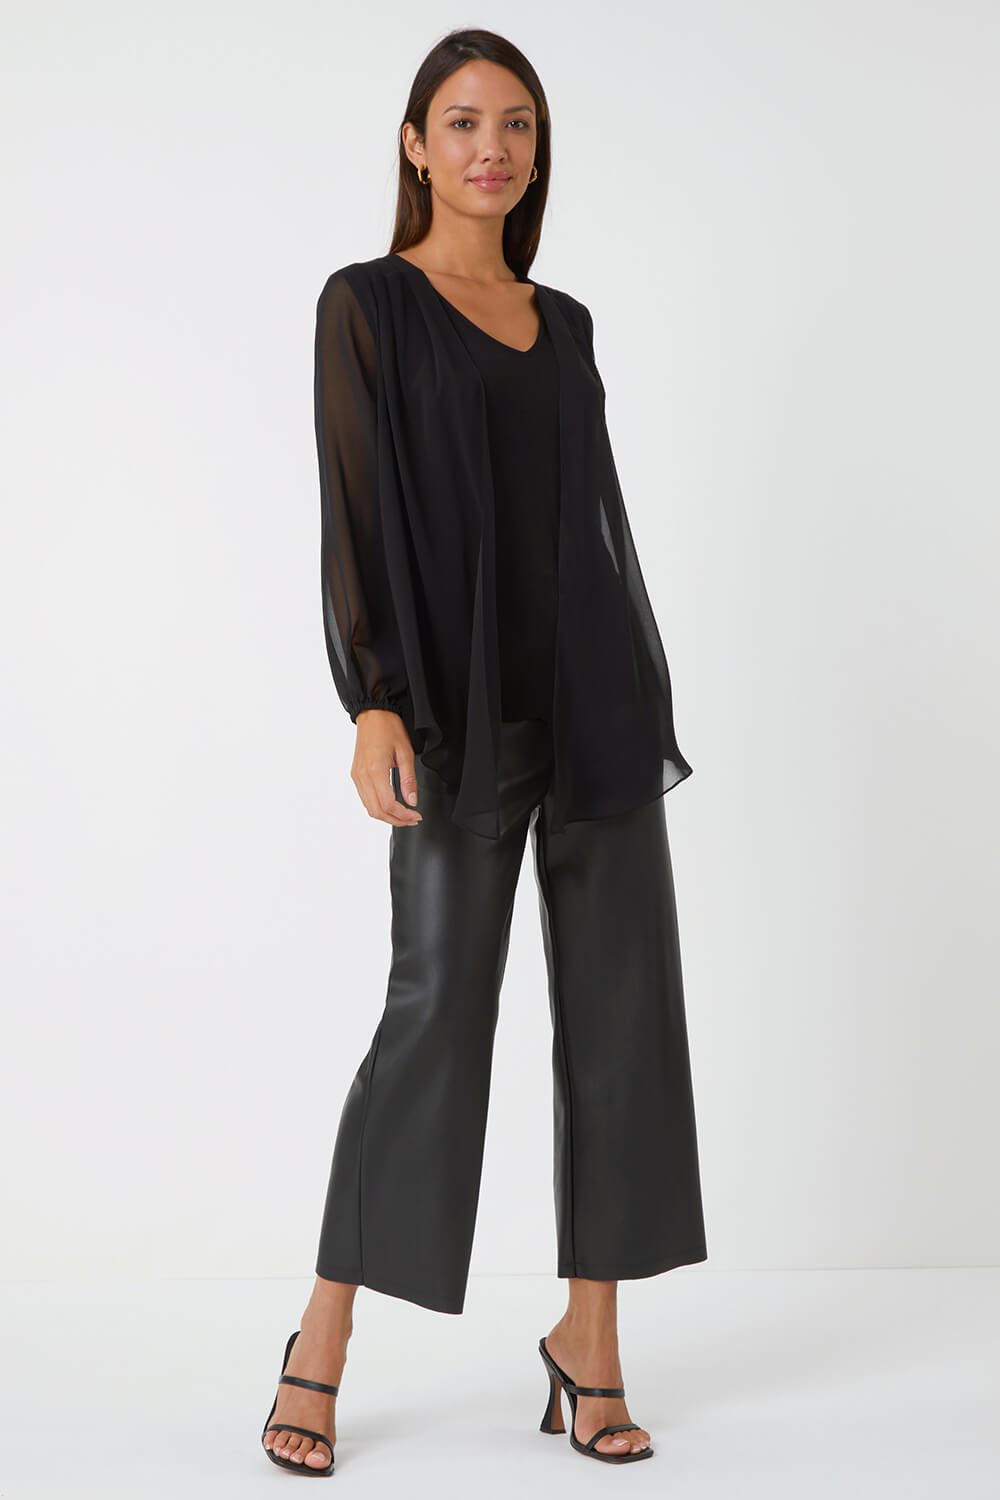 Black Contrast Chiffon Overlay Stretch Top, Image 2 of 5